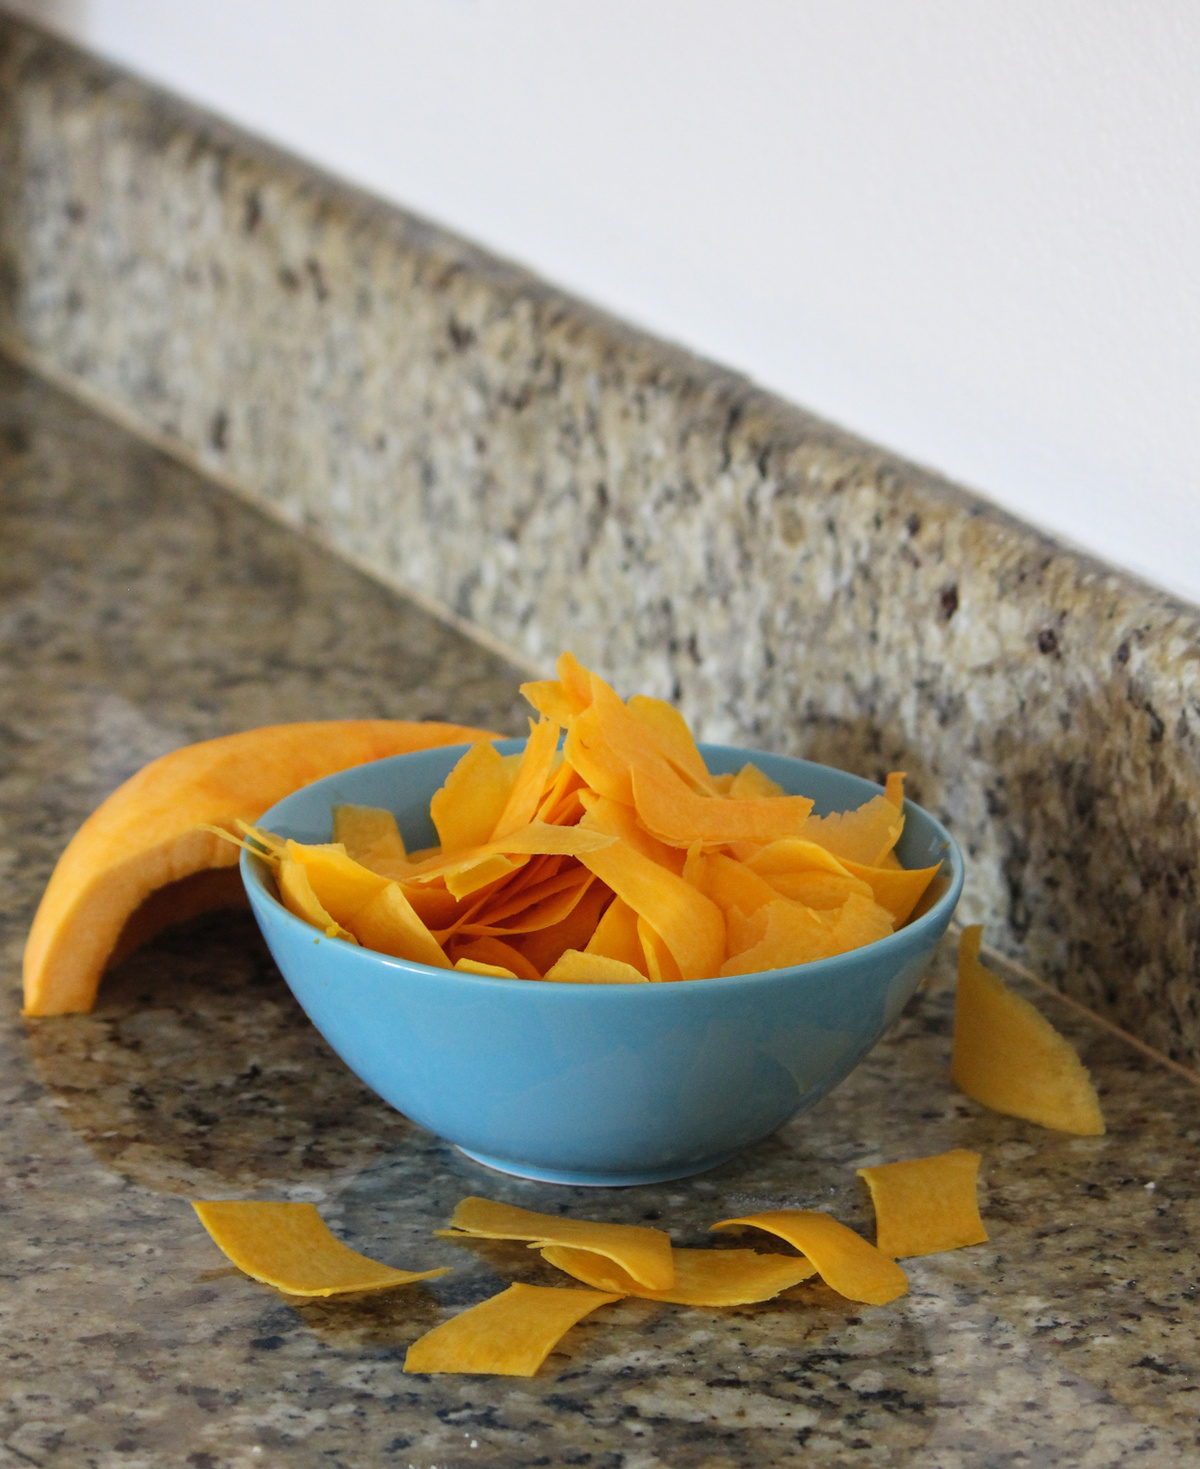 Use a vegetable peeler to make super thin slices of pumpkin, which makes it easier to arrange them into a spiral shape